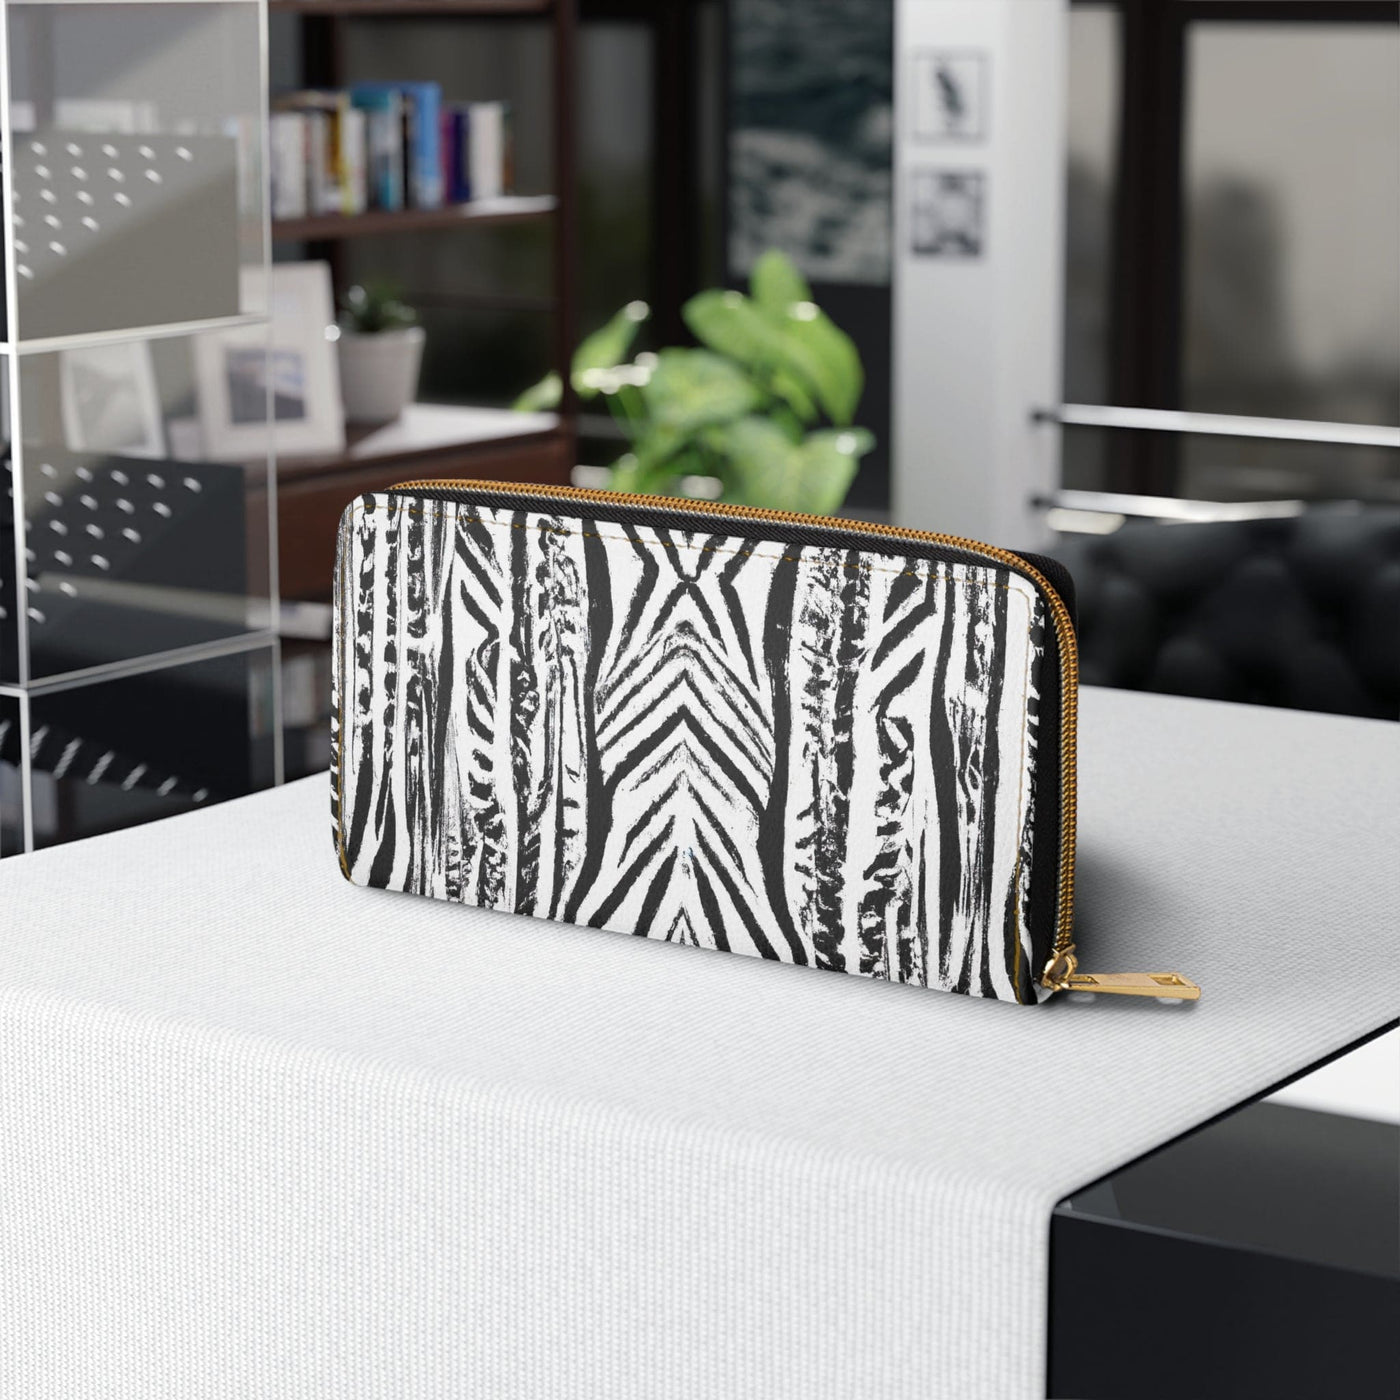 Native Black And White Abstract Pattern Womens Zipper Wallet Clutch Purse